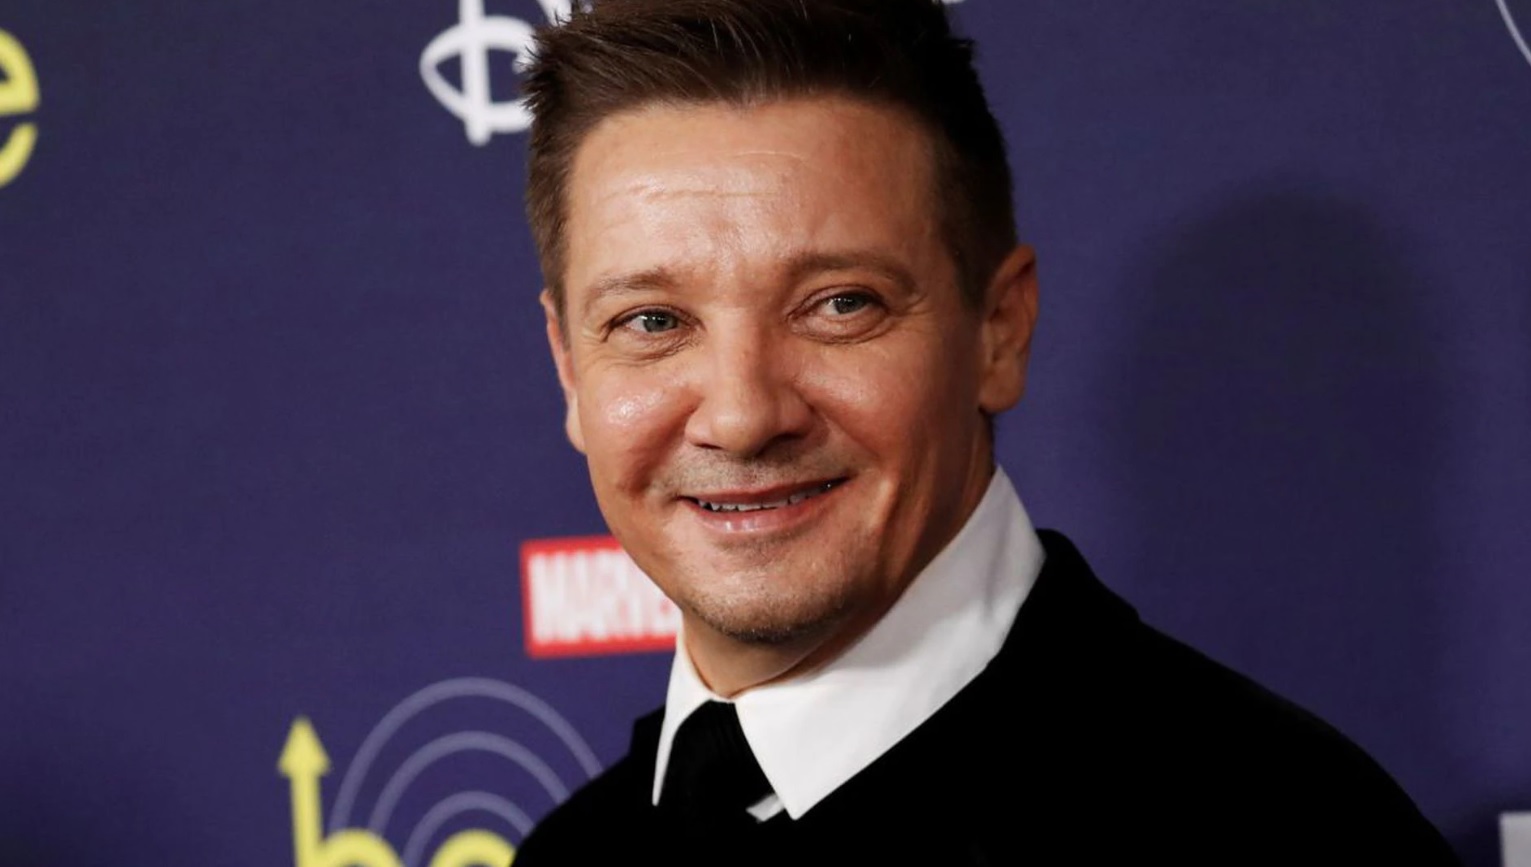 actores taquilleros - Jeremy Renner